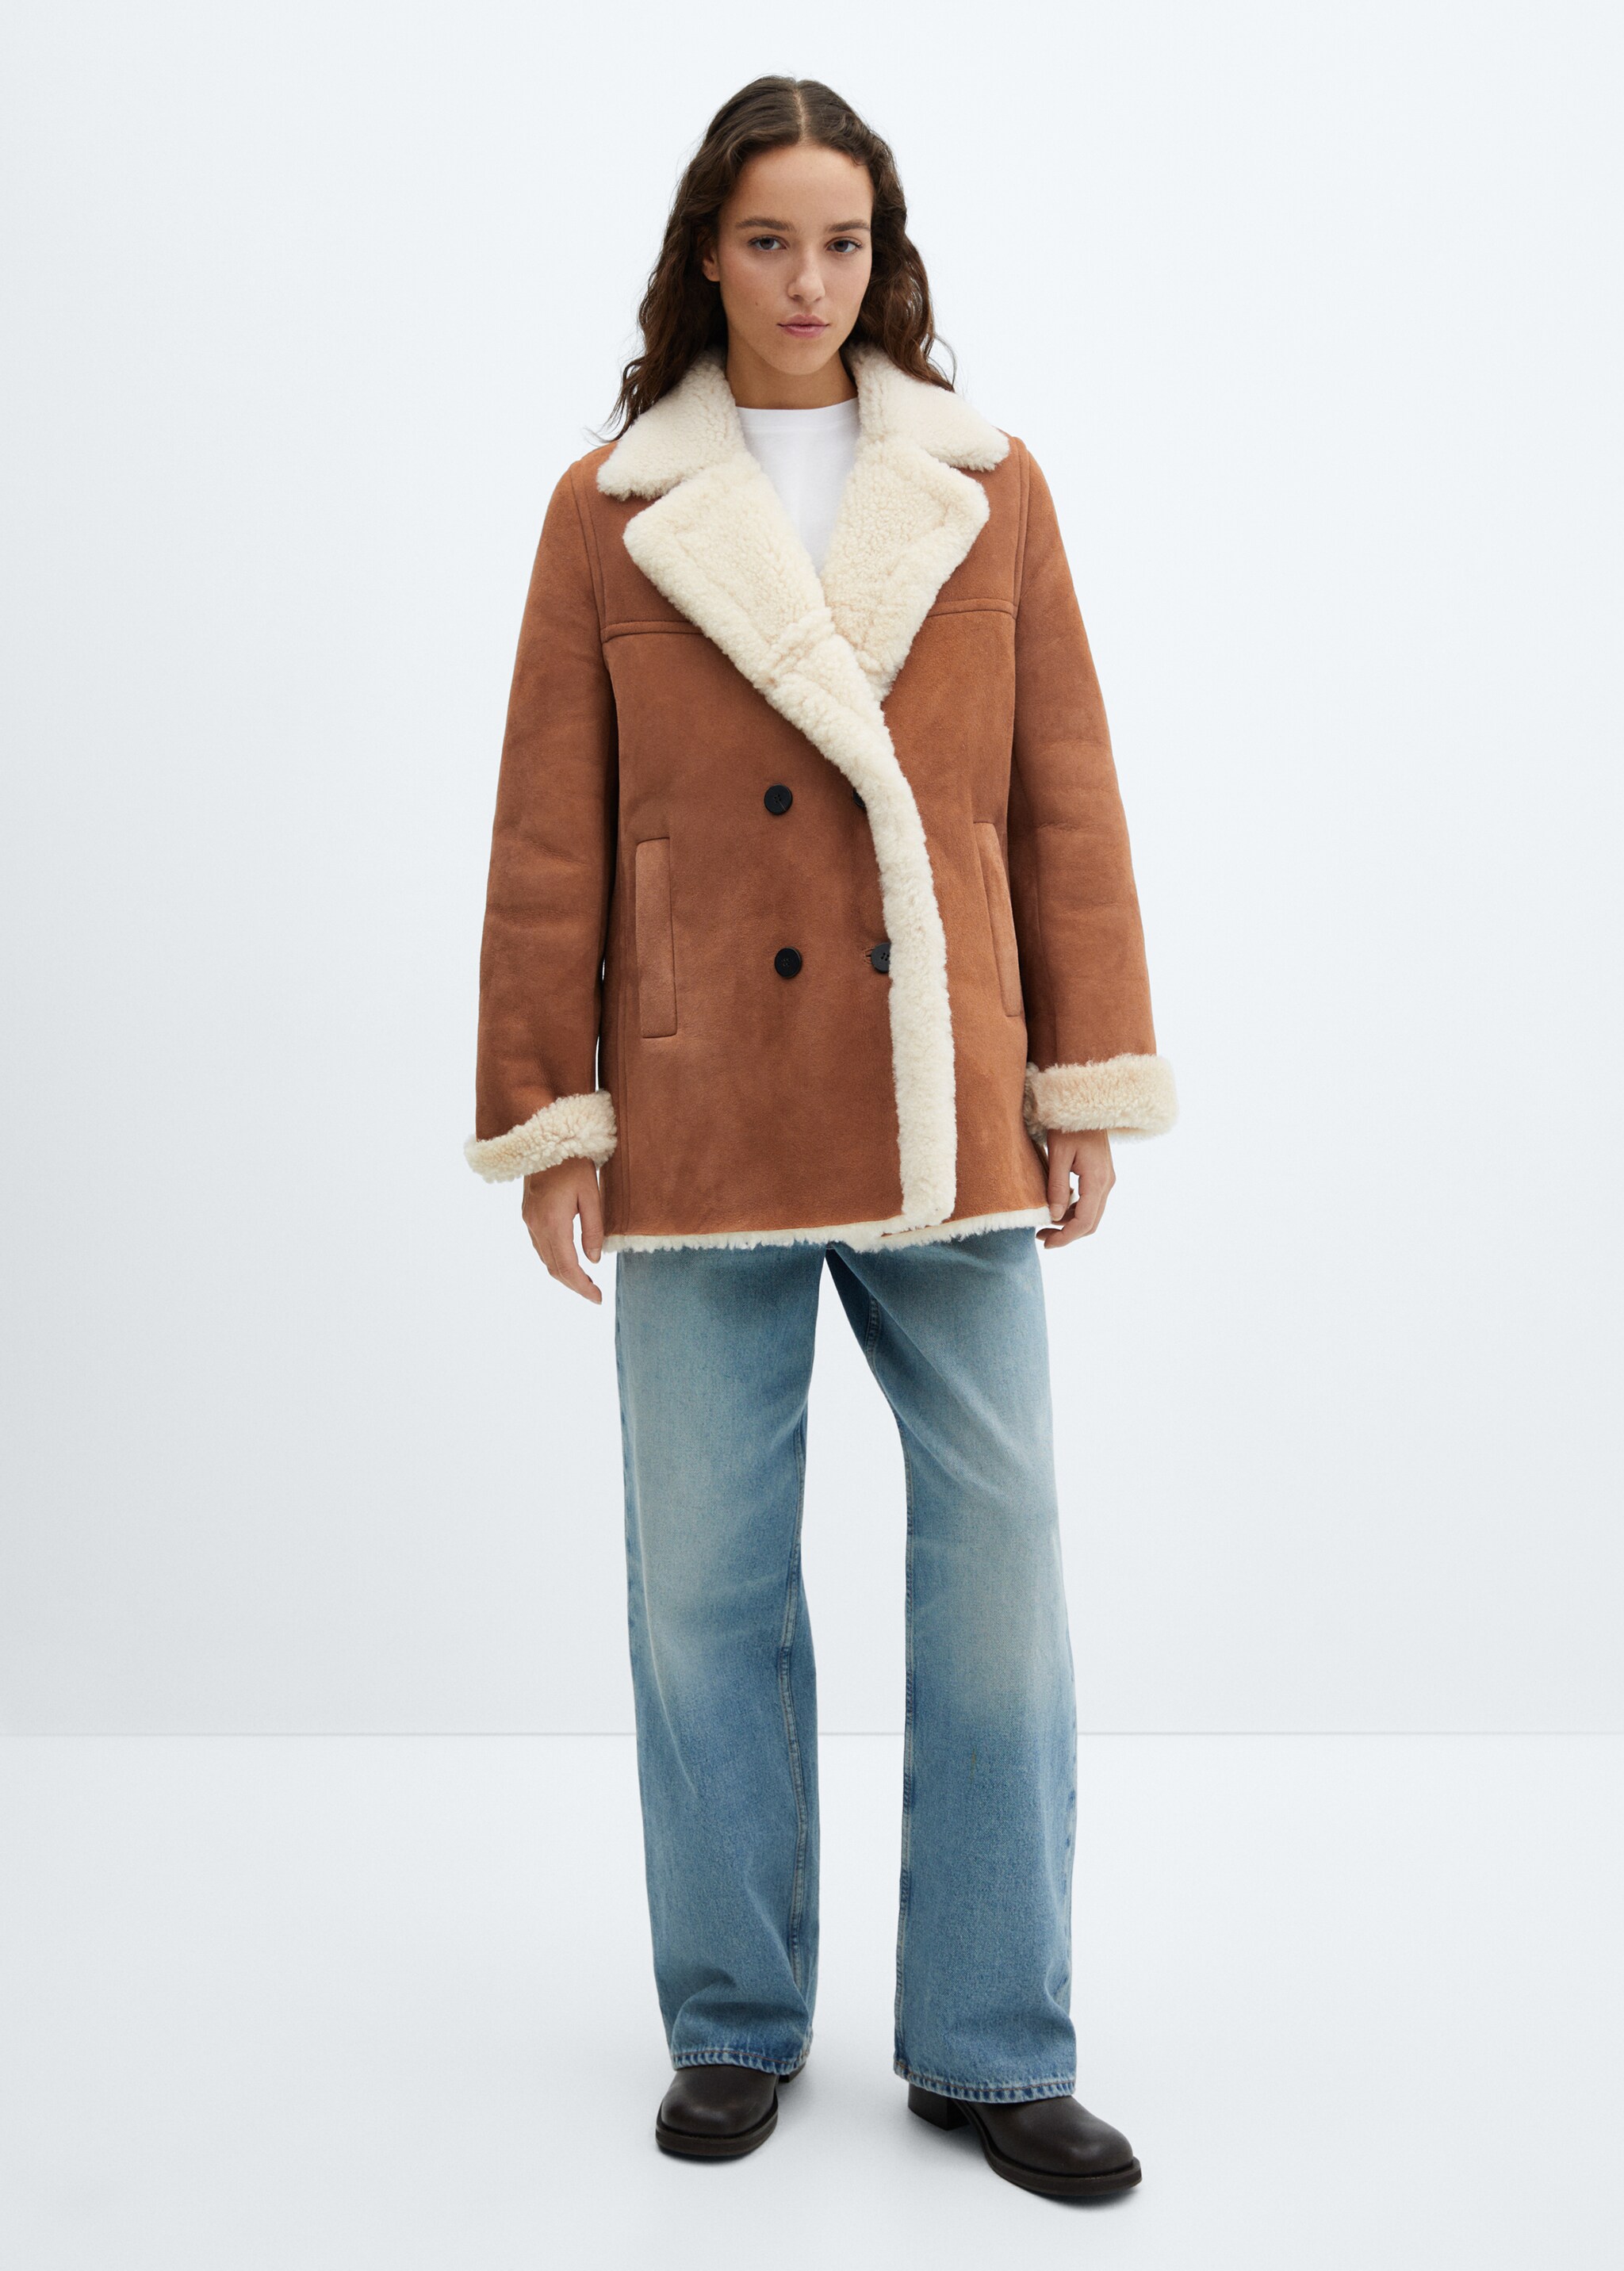 Shearling-lined coat - General plane